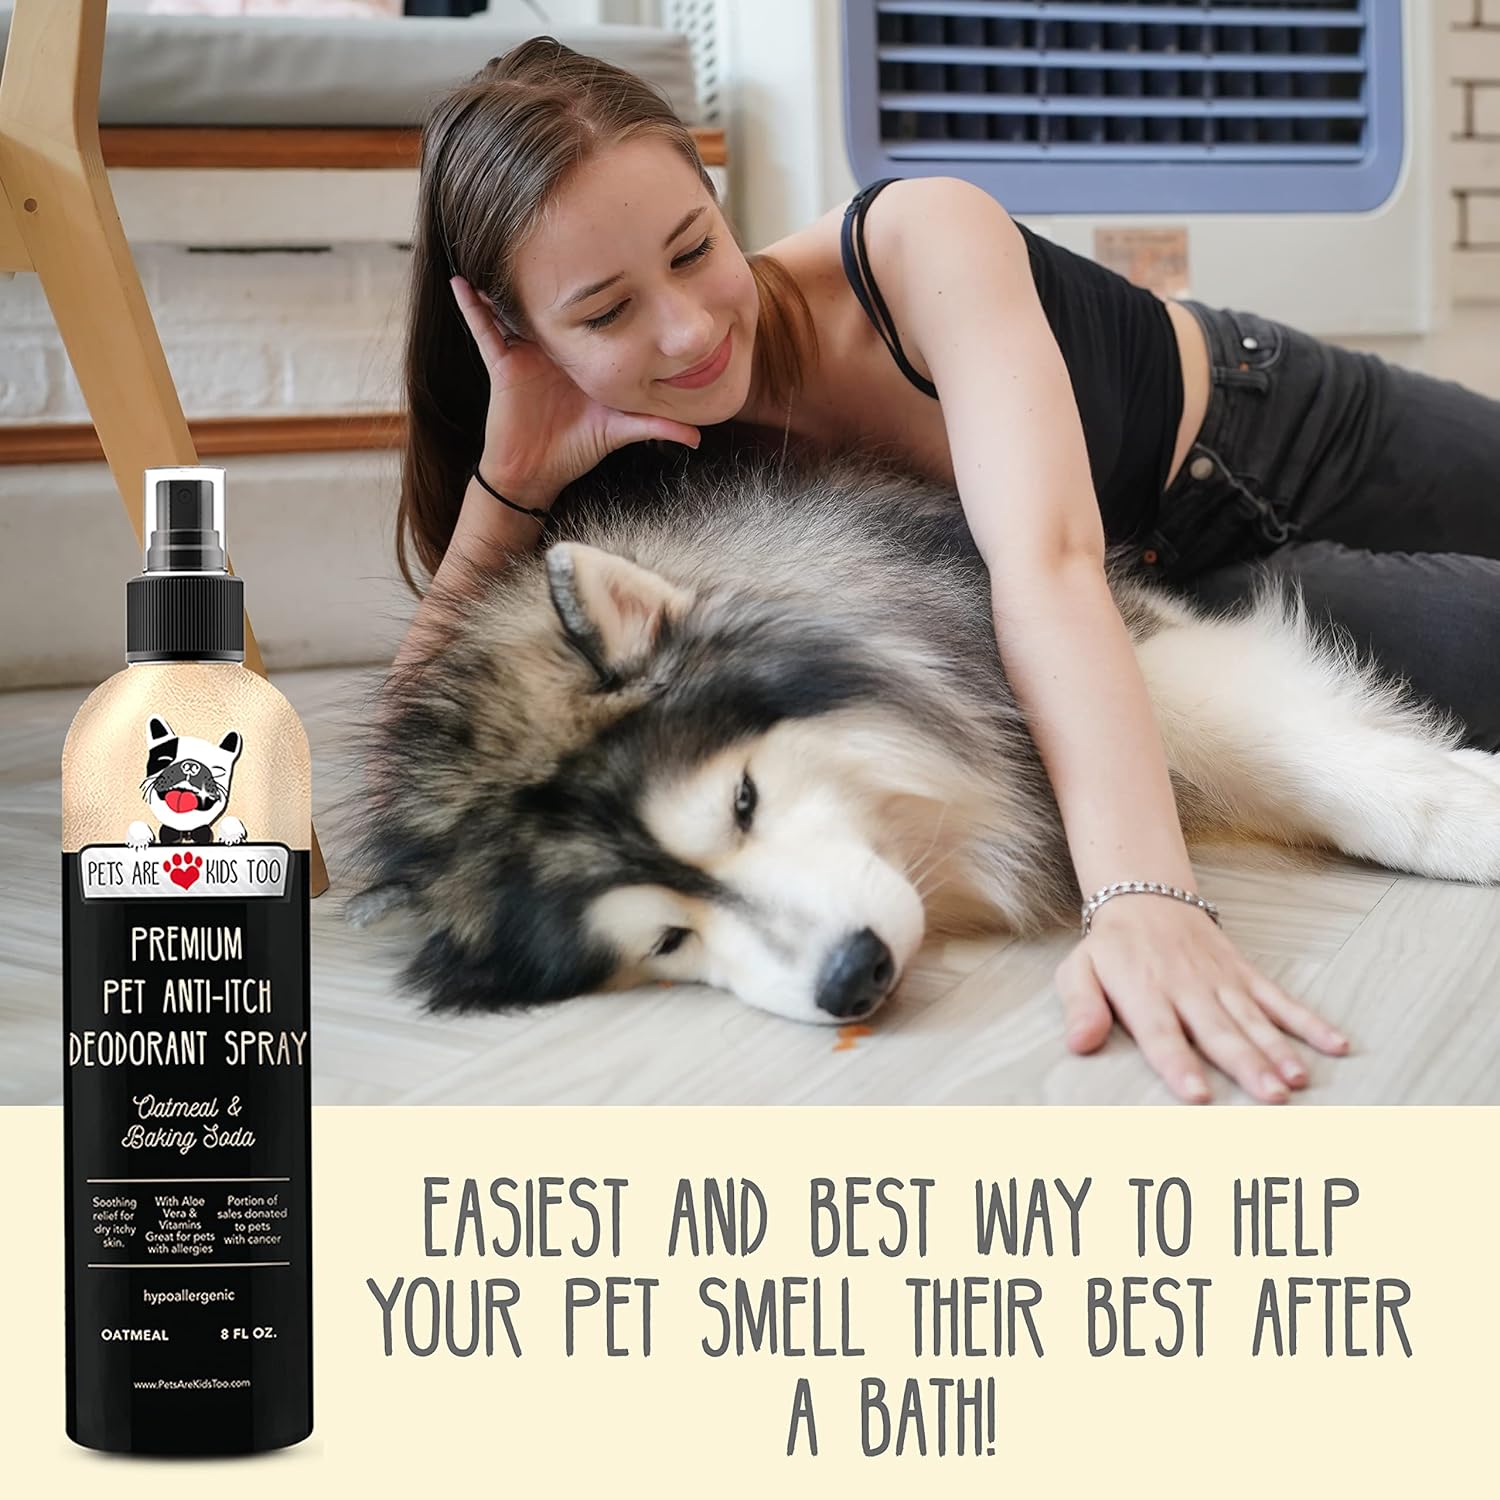 Easiest and best way to help your pet smell their best after a bath